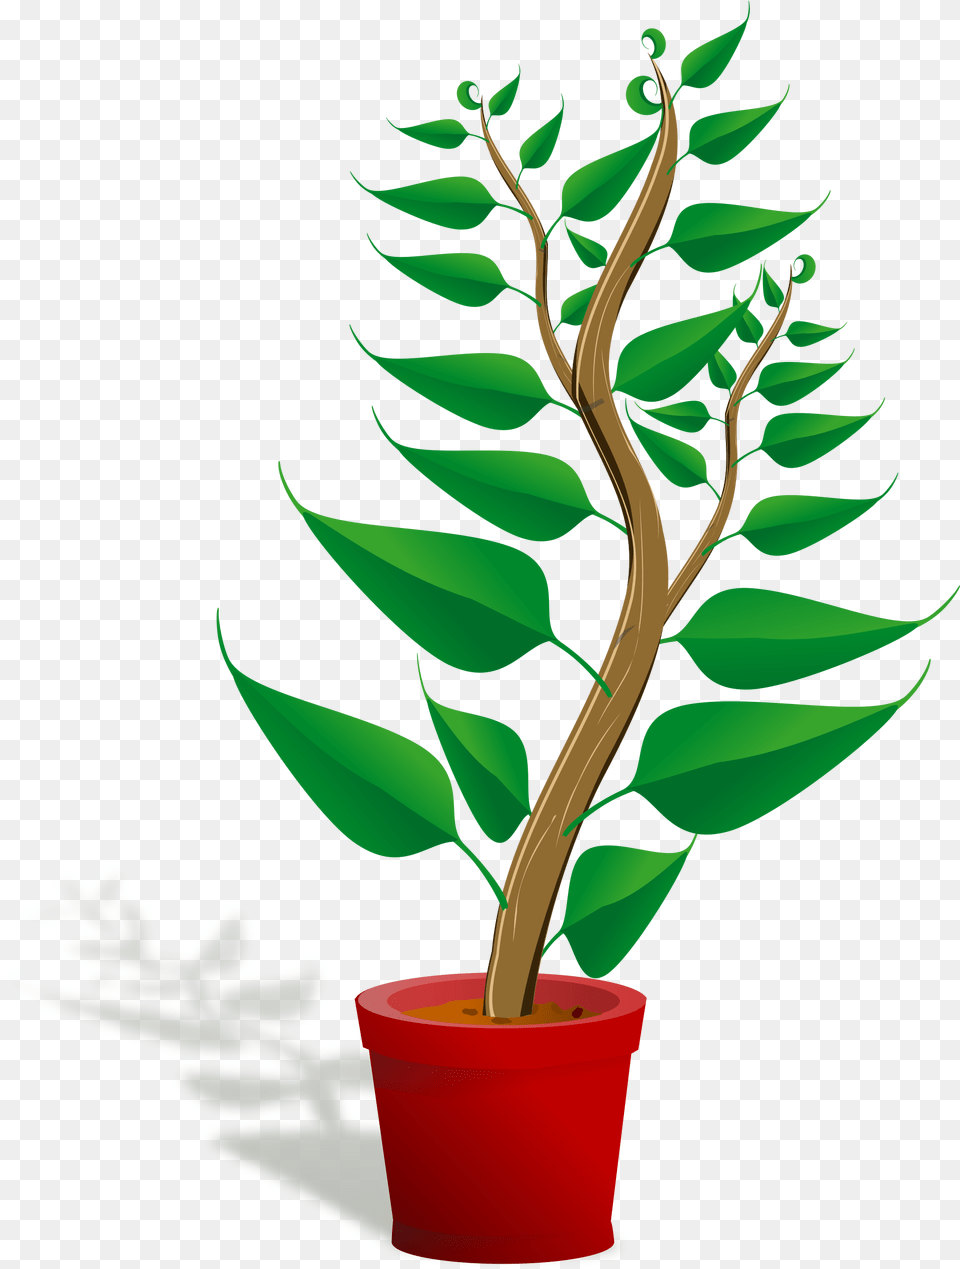 Pot On Stove Clipart Vector Clip Art Online Royalty Getting To Know Plants, Leaf, Plant, Tree, Potted Plant Png